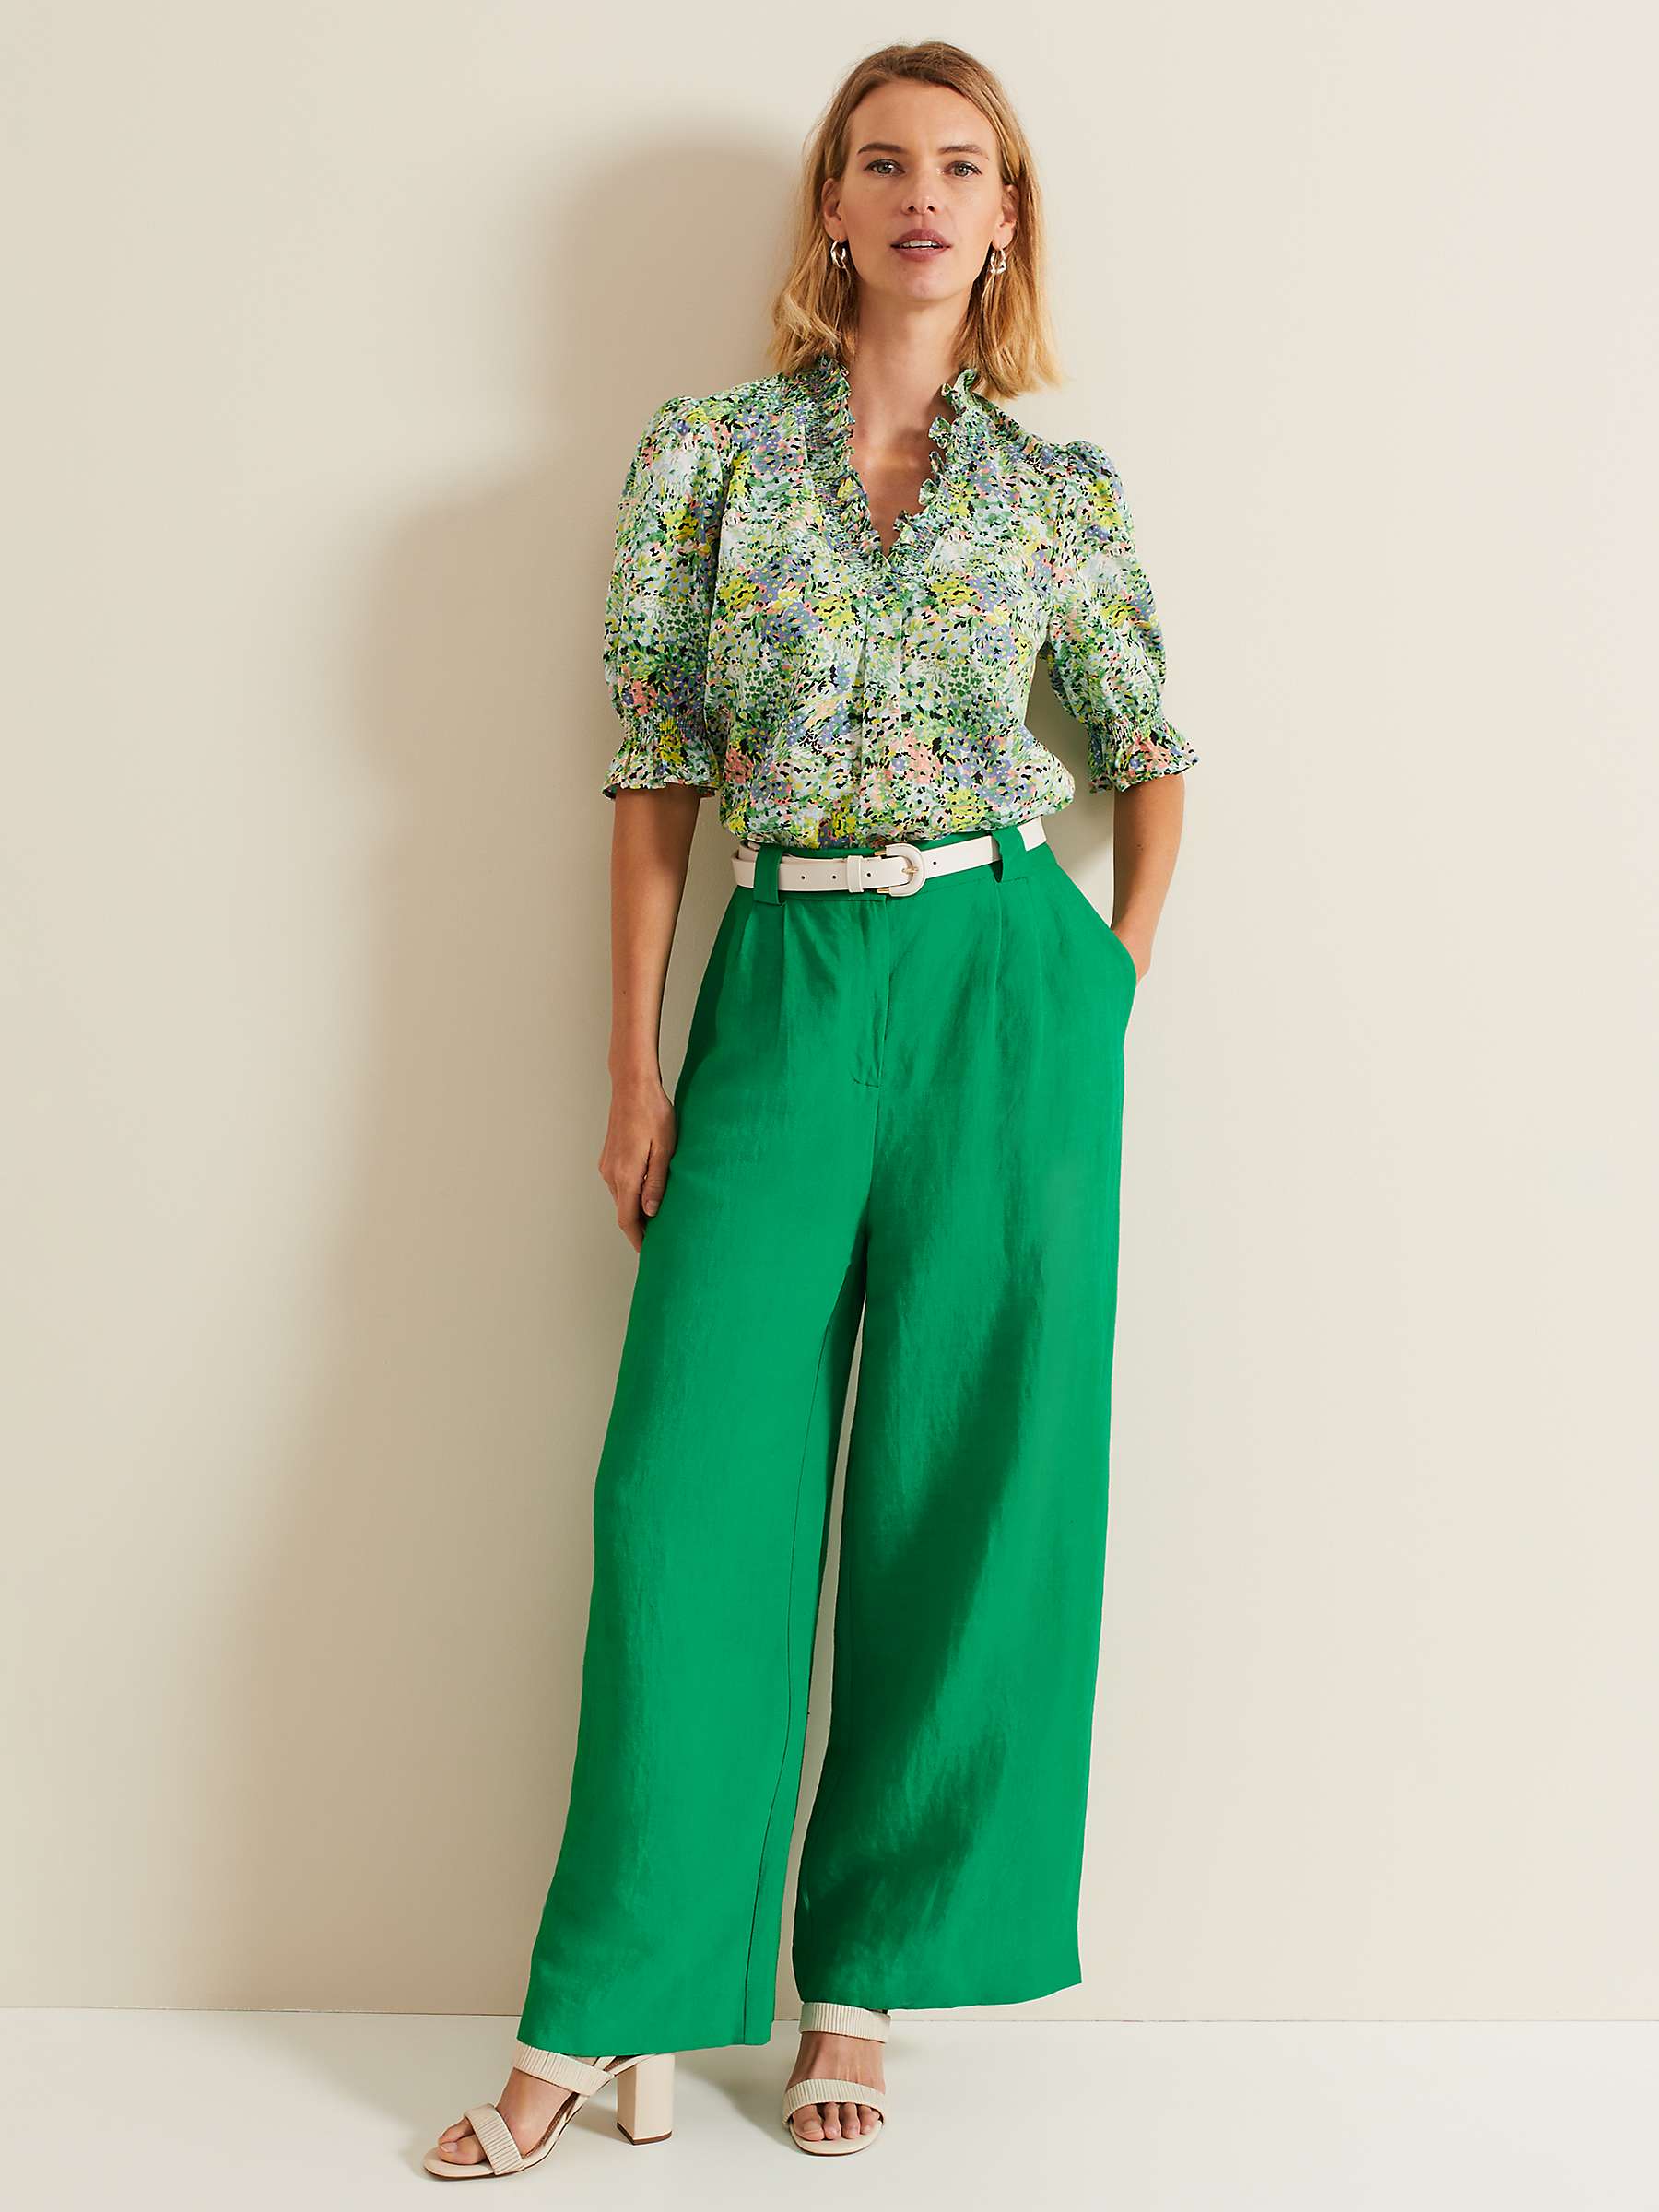 Buy Phase Eight Izara Floral print Frill Neck Blouse, Multi Online at johnlewis.com